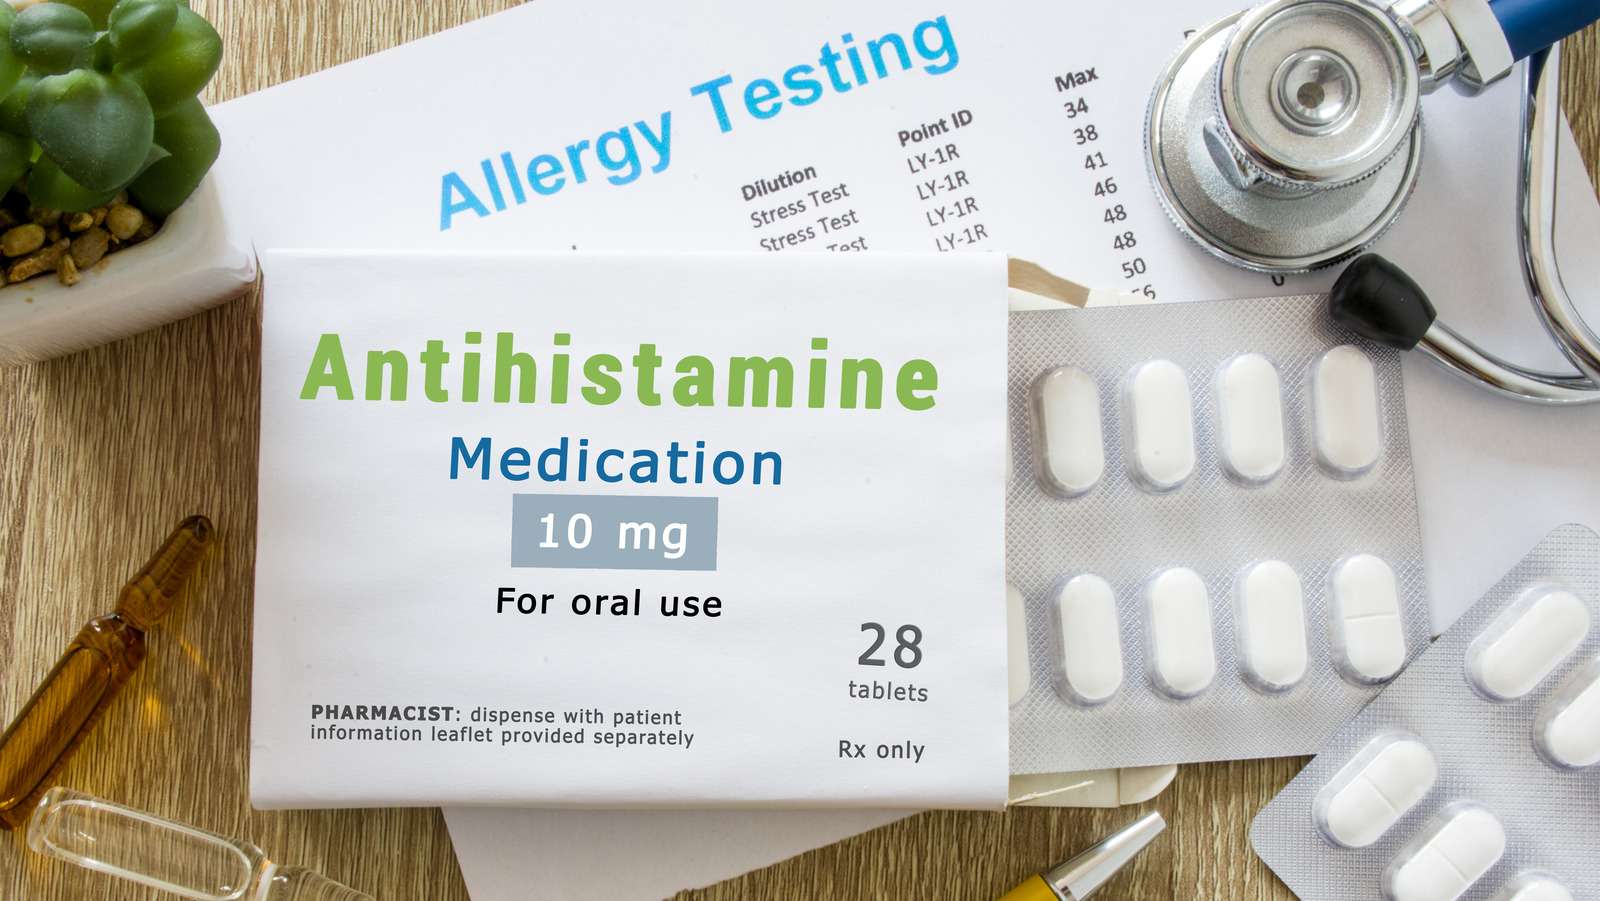 Why Some Antihistamines Can Be Risky If You Have High Blood Pressure